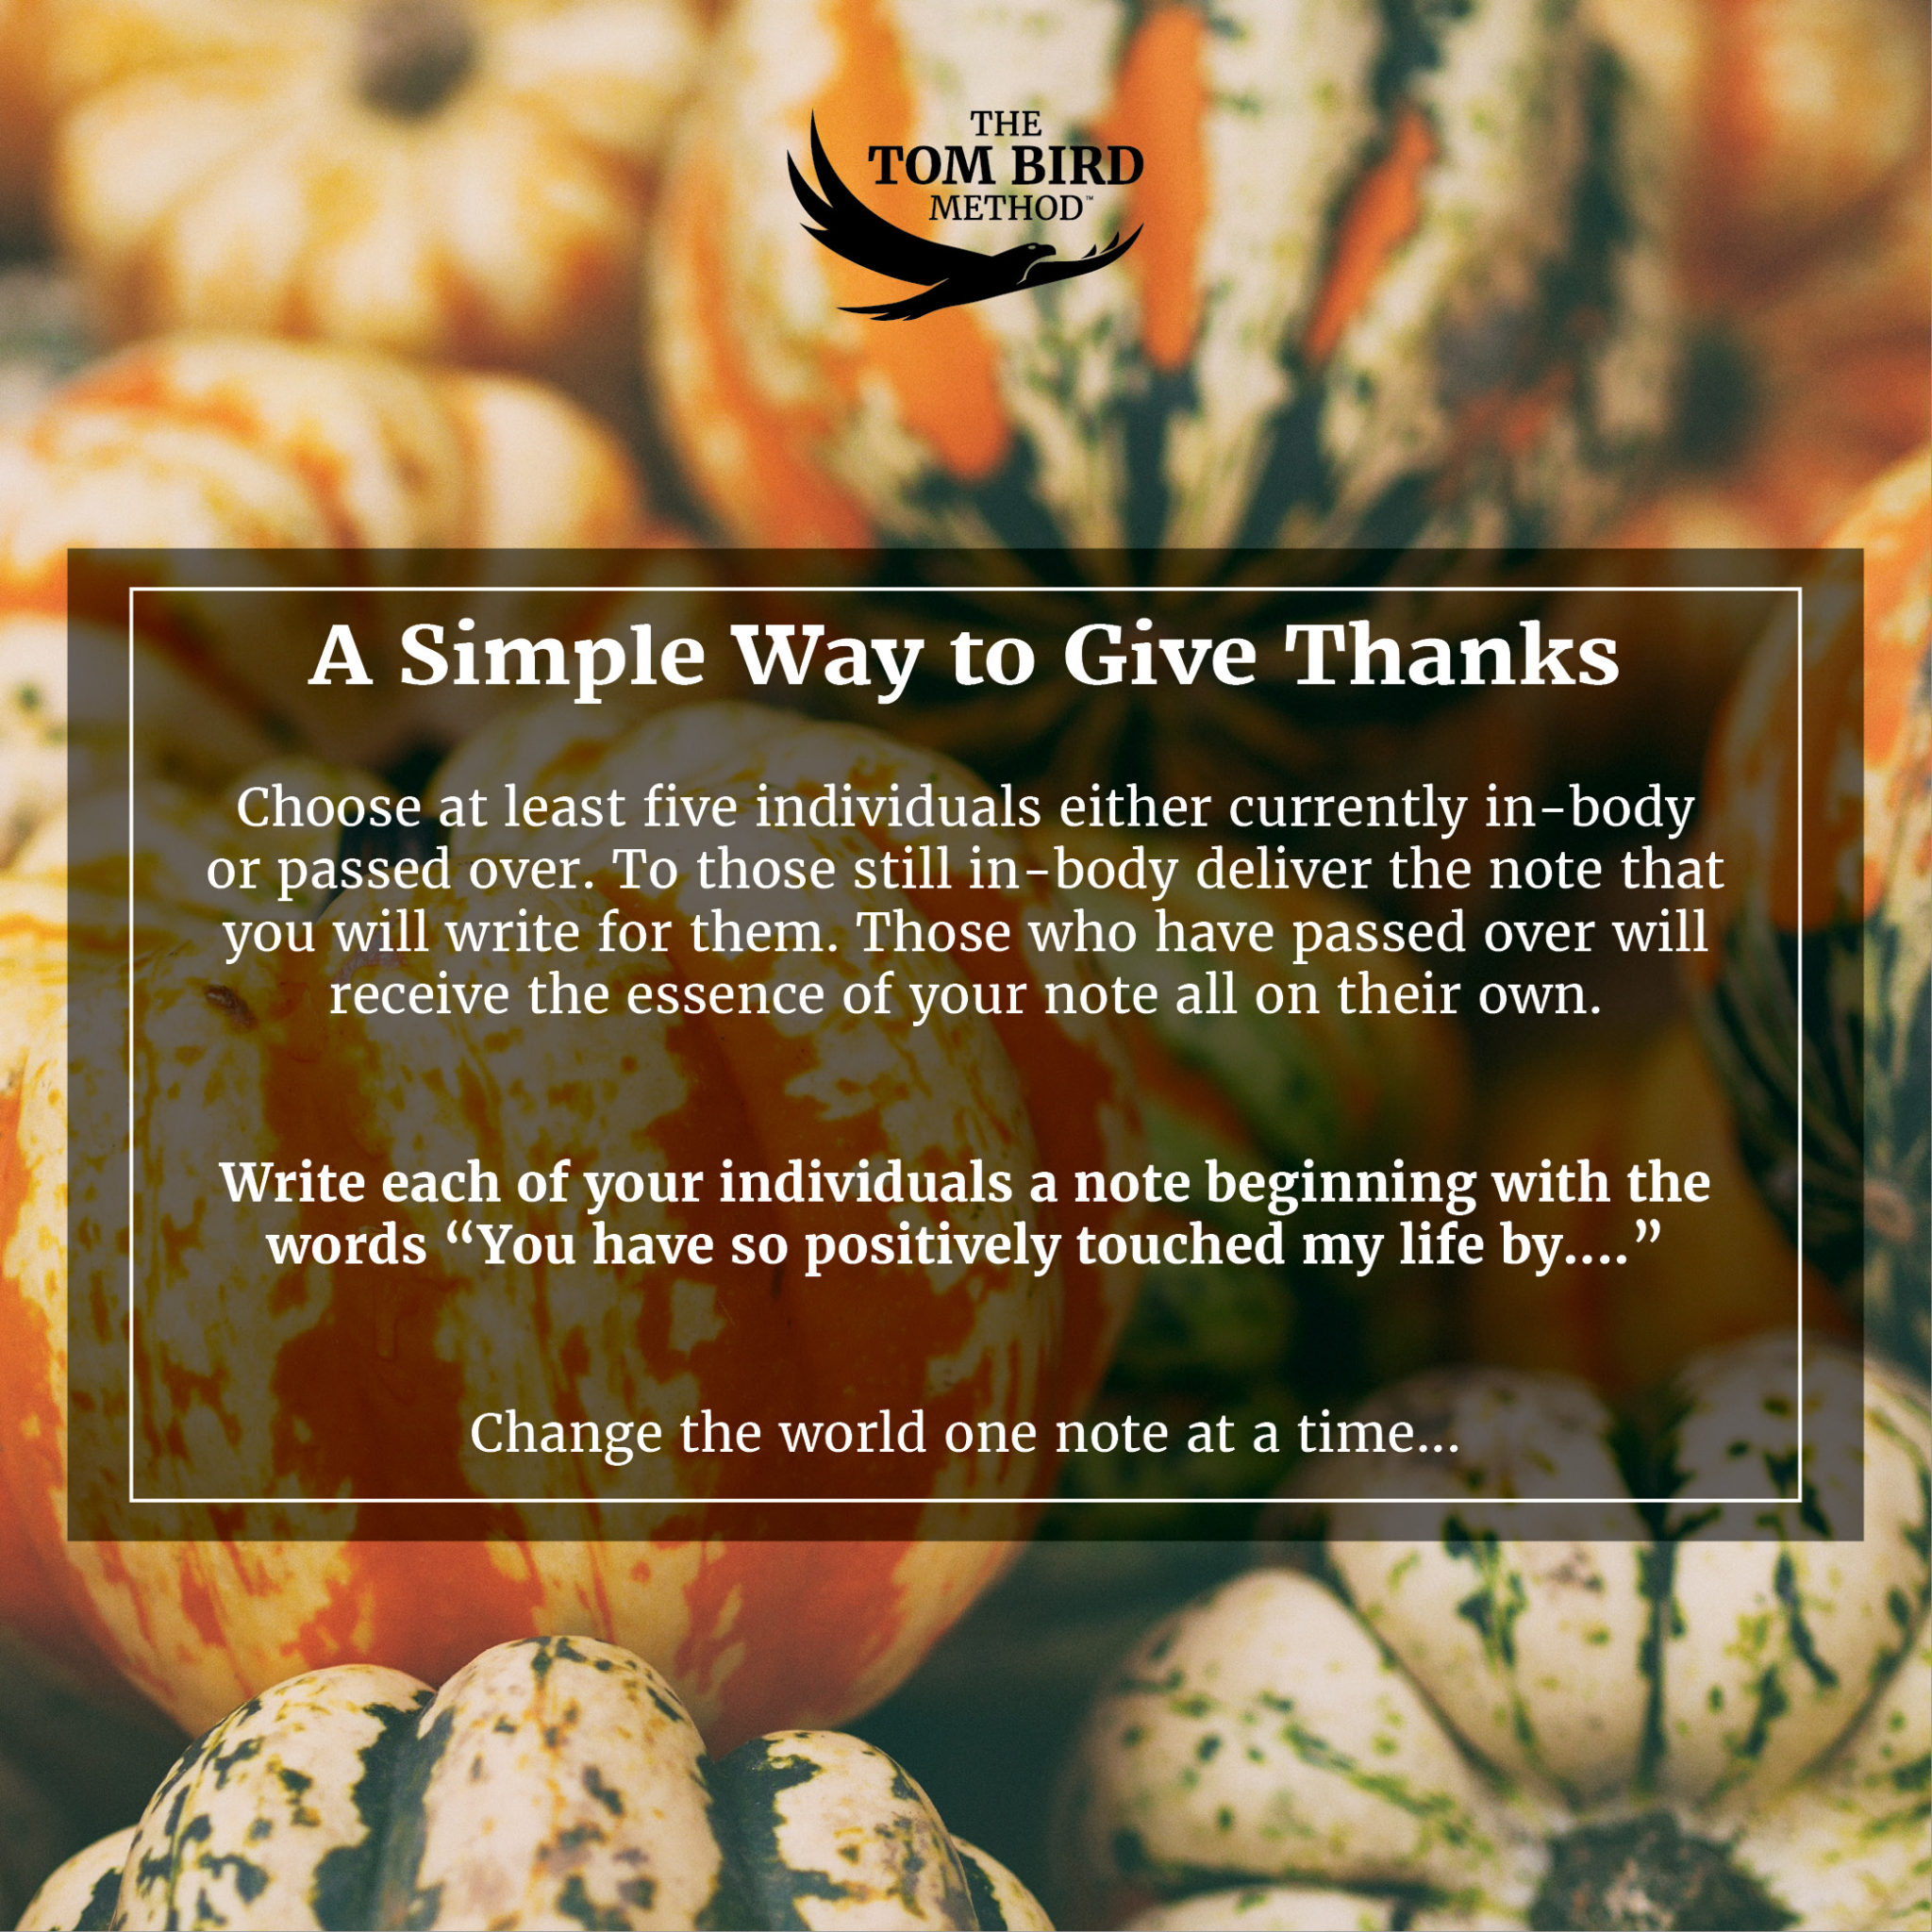 Simple way to give thanks - Tom Bird